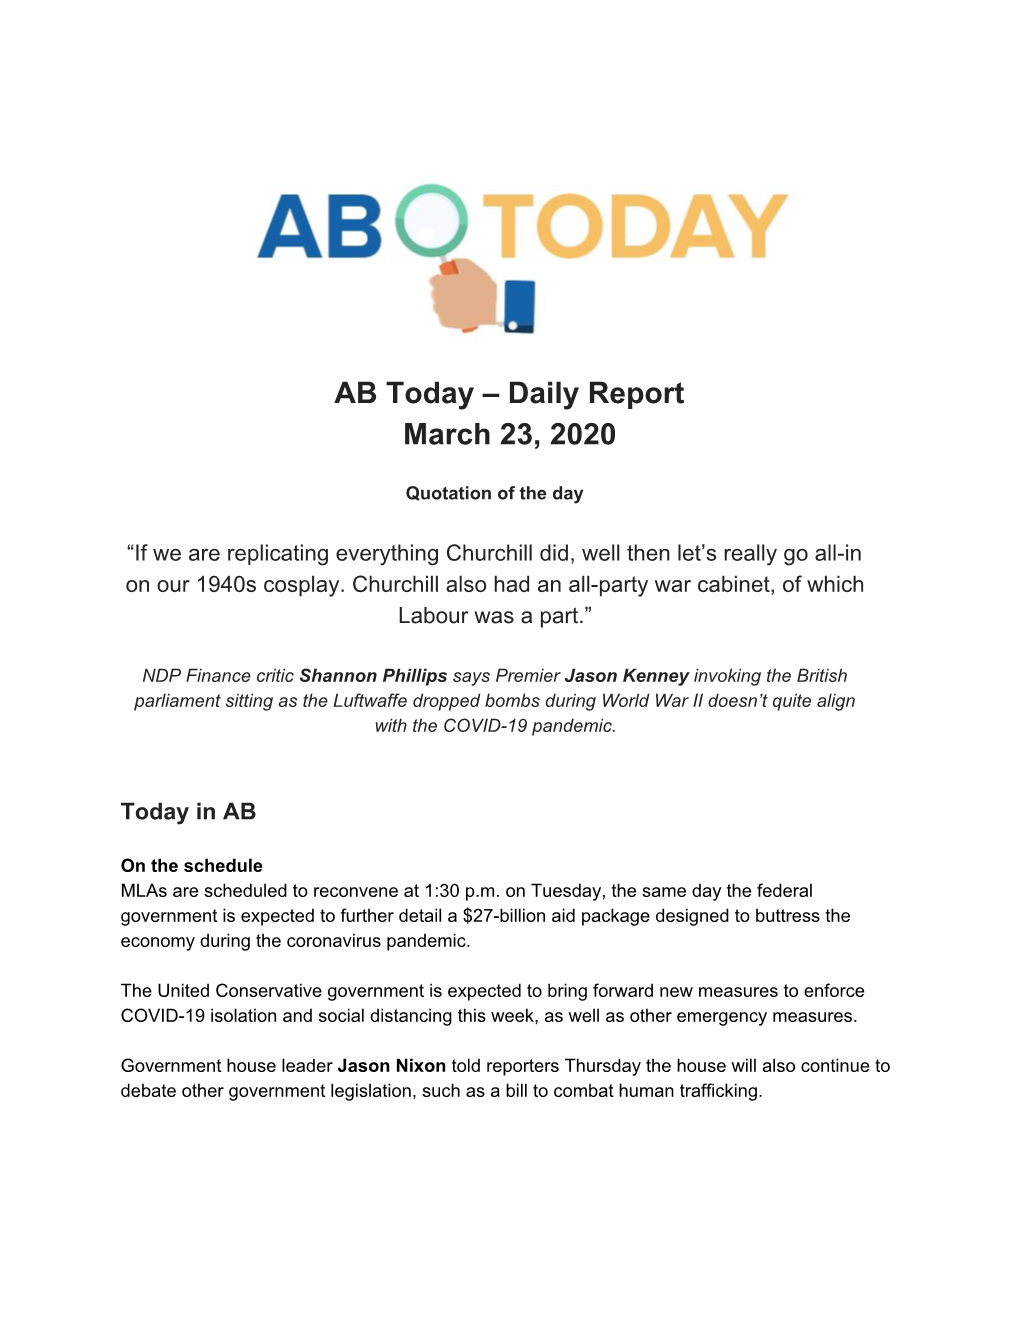 AB Today – Daily Report March 23, 2020